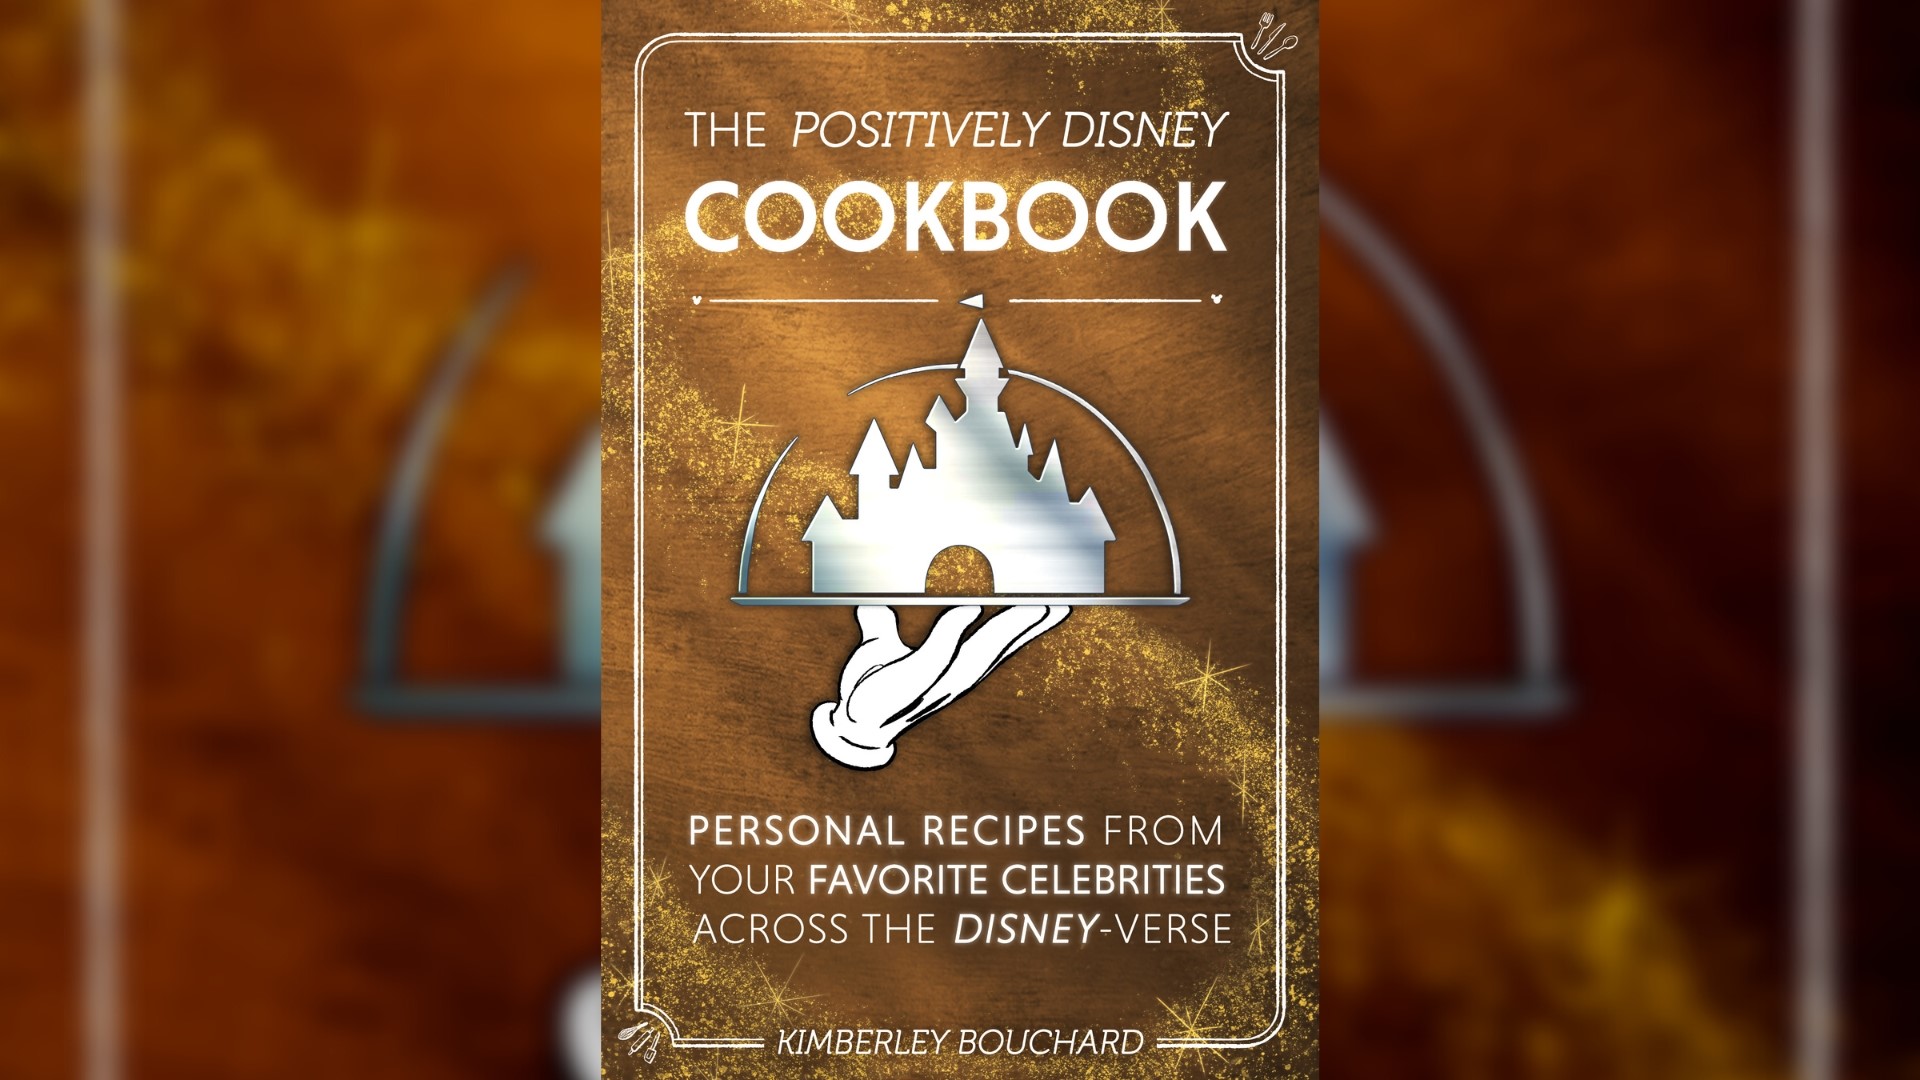 "The Positively Disney Cookbook" by Kimberley Bouchard is a compilation of personal recipes from Disney celebrities that anyone can make. 🏰🍴 #newdaynw